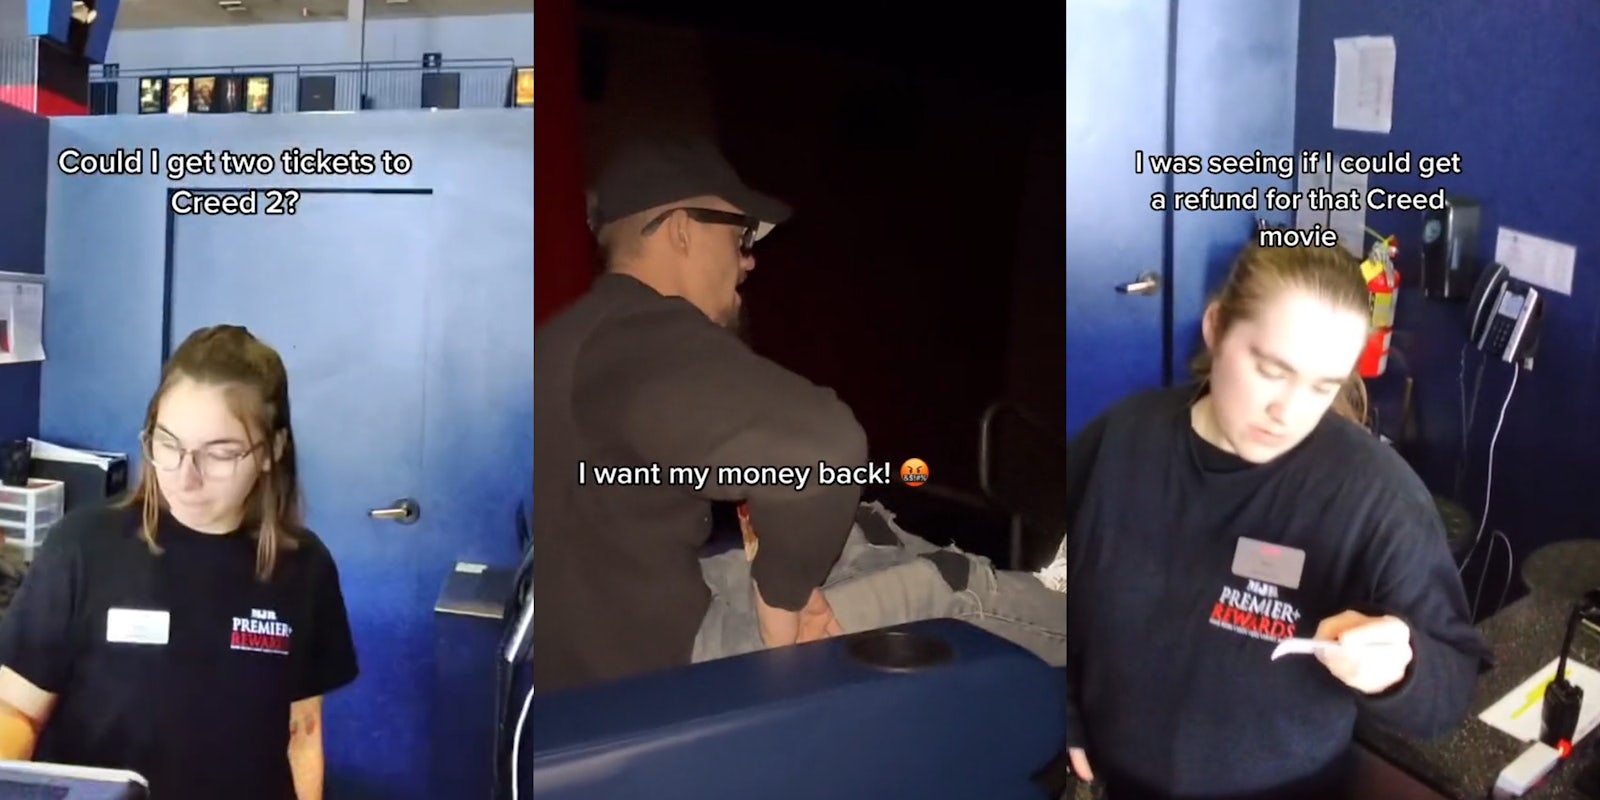 movie theater employee with caption 'Could I get two tickets to see Creed 2?' (l) movie theater customer in seat with caption 'I want my money back!' (c) movie theater employee holding ticket with caption 'I was seeing if I could get a refund for that Creed movie' (r)